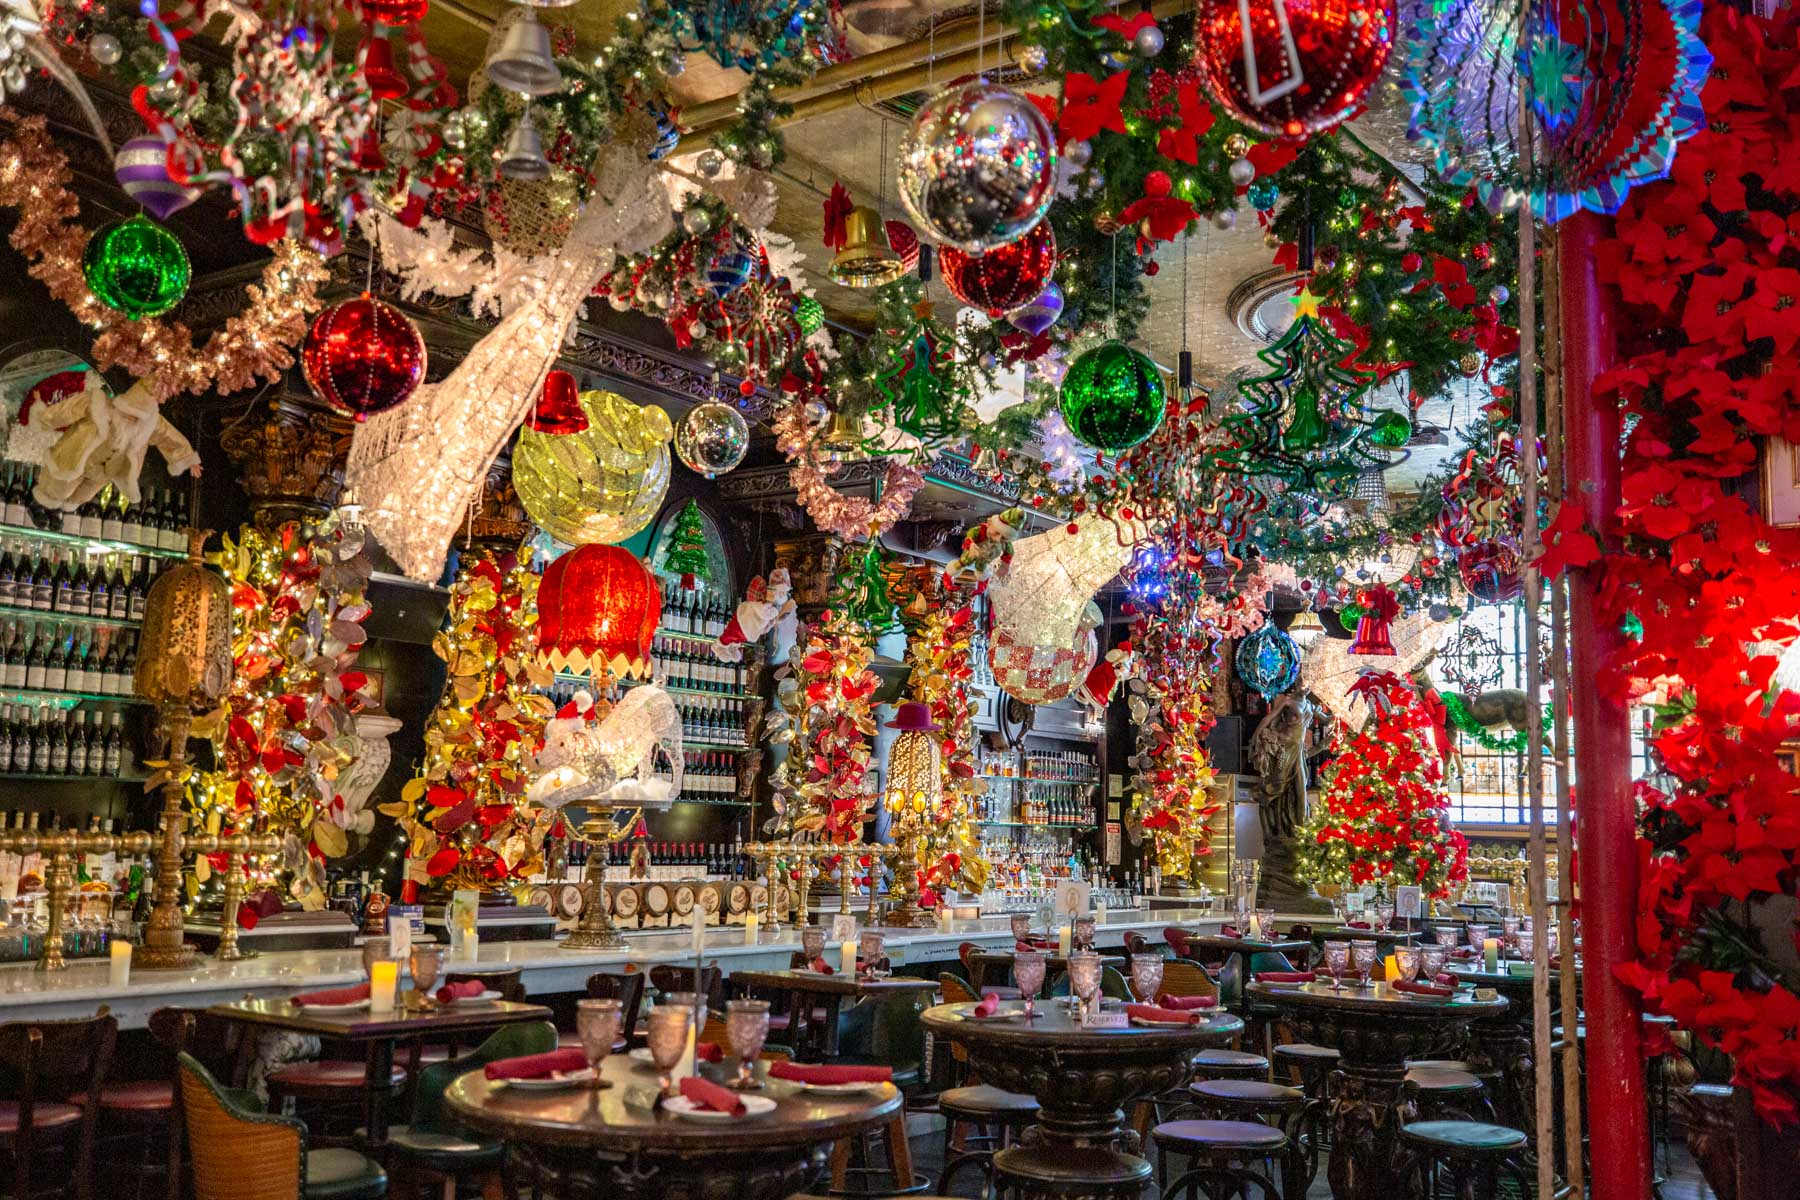 Oscar Wilde Christmas Decorations
Bars open Christmas Eve and Day NYC